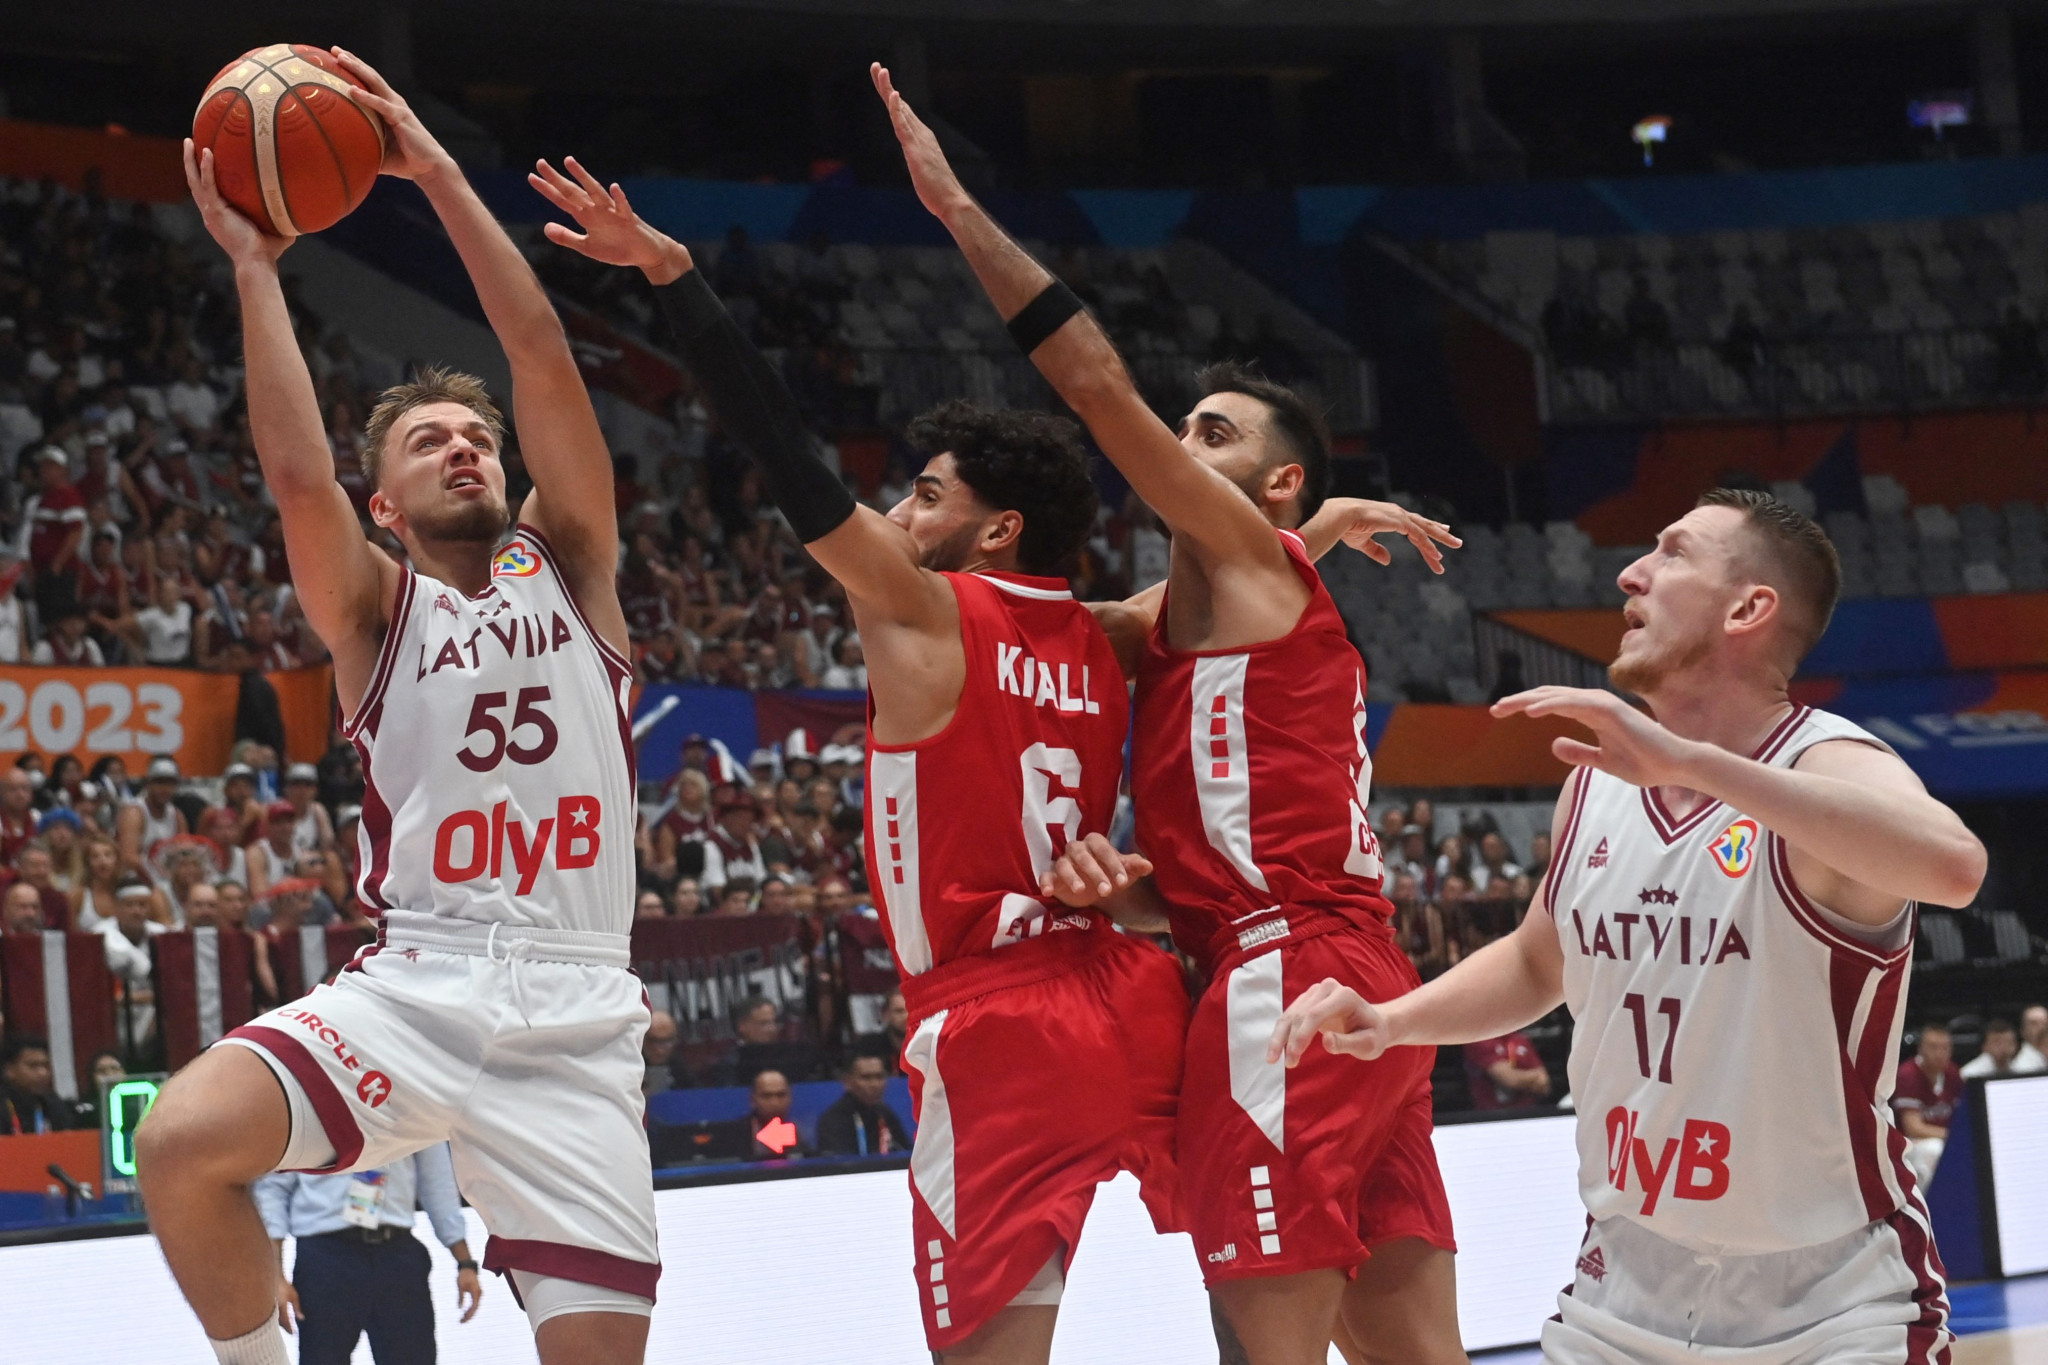 Latvia scored more than 100 points against Lebanon on the opening day of the FIBA World Cup 2023 ©Getty Images